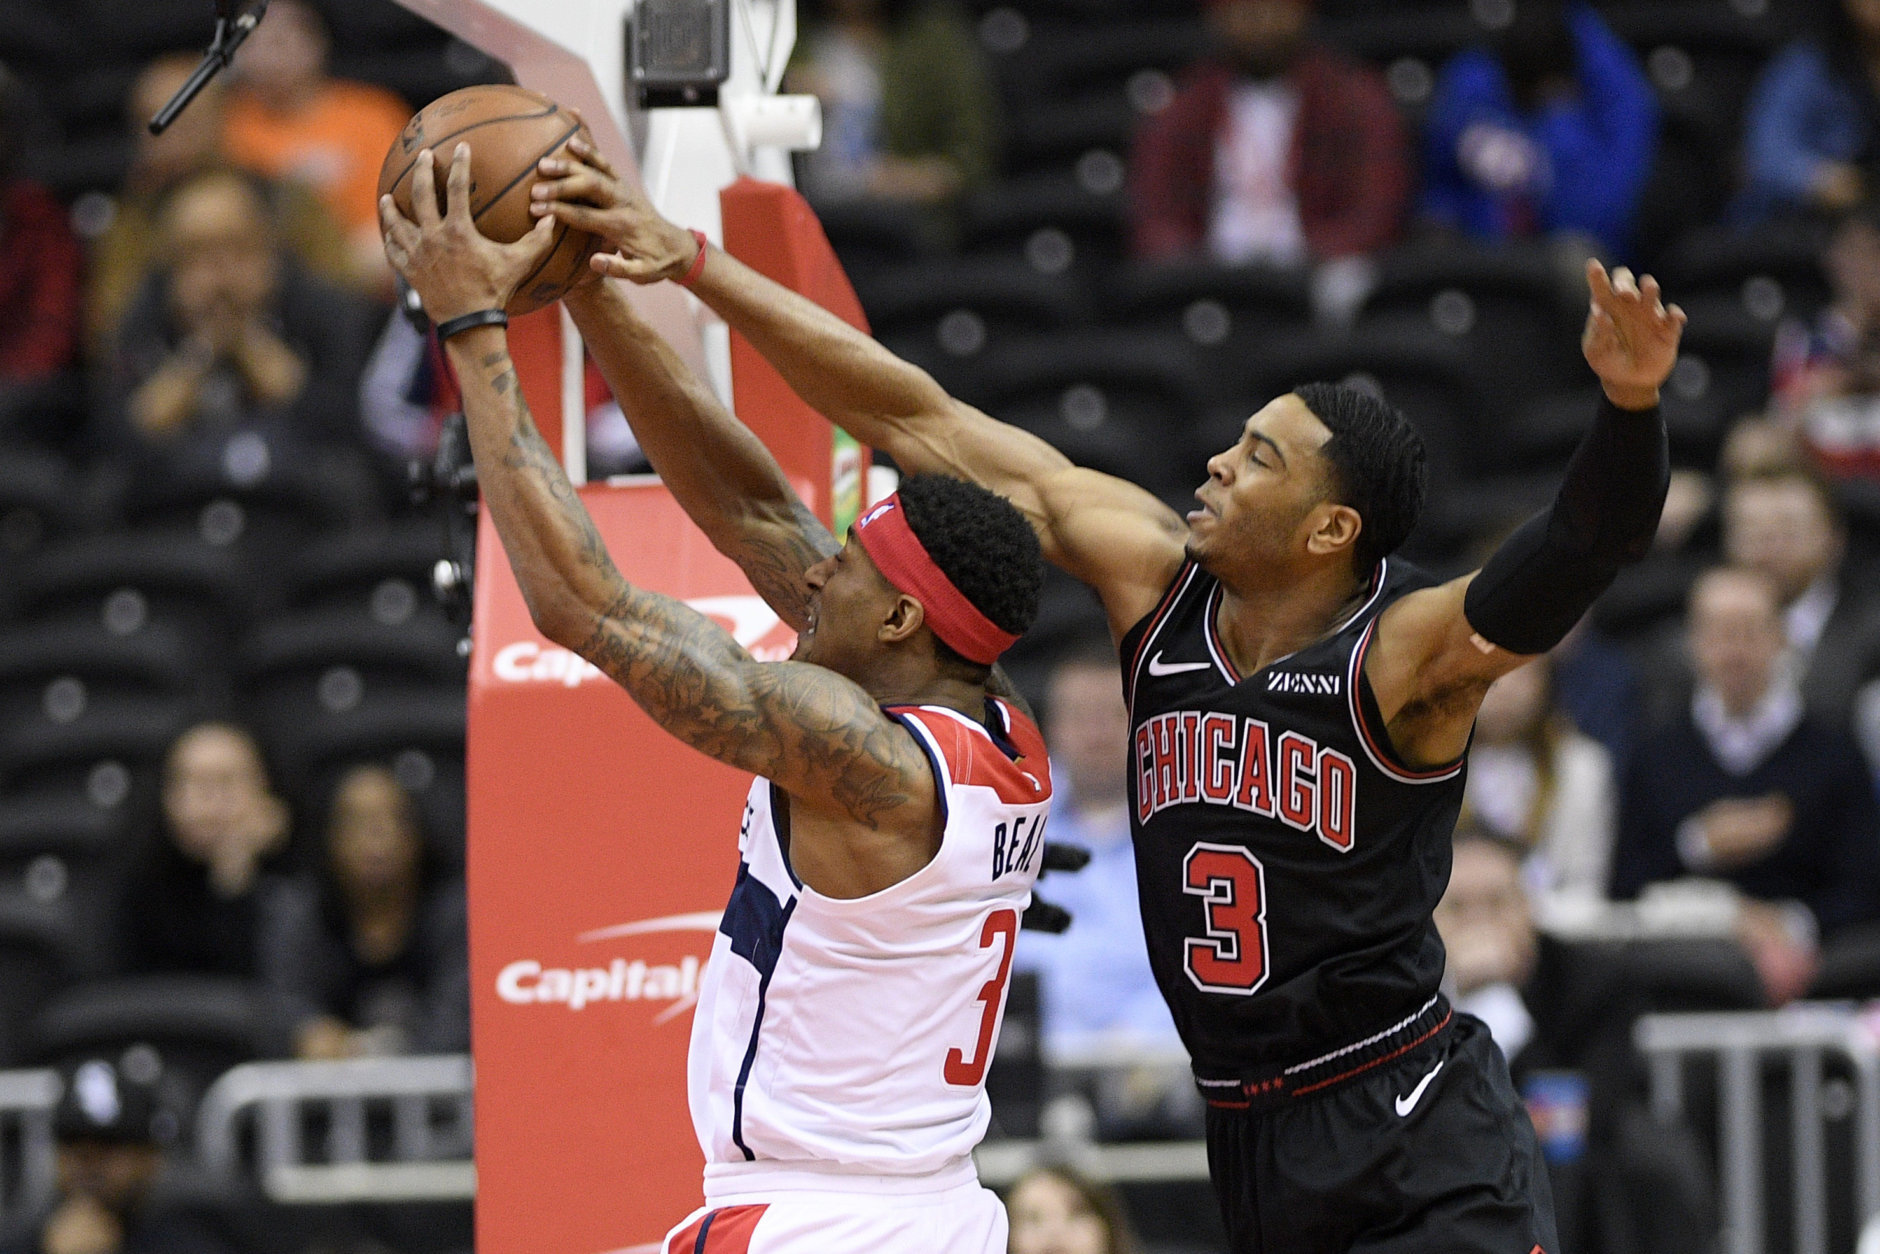 Washington Wizards guard Bradley Beal, left, goes to the basket against Chicago Bulls guard Shaquille Harrison, right, during the first half of an NBA basketball game, Wednesday, April 3, 2019, in Washington. (AP Photo/Nick Wass)